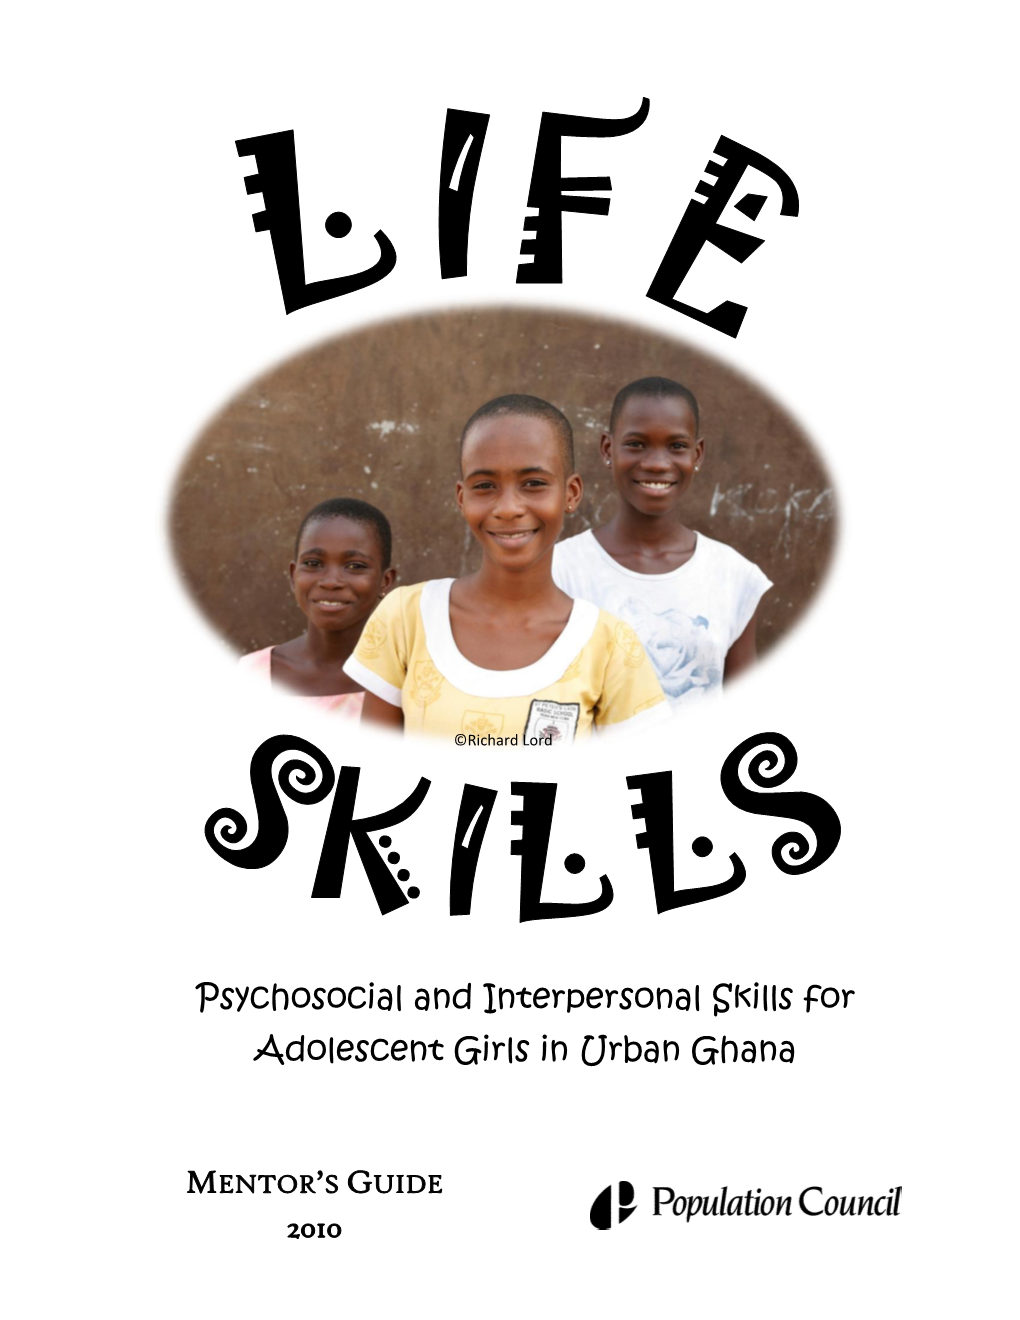 Psychosocial and Interpersonal Skills for Adolescent Girls in Urban Ghana